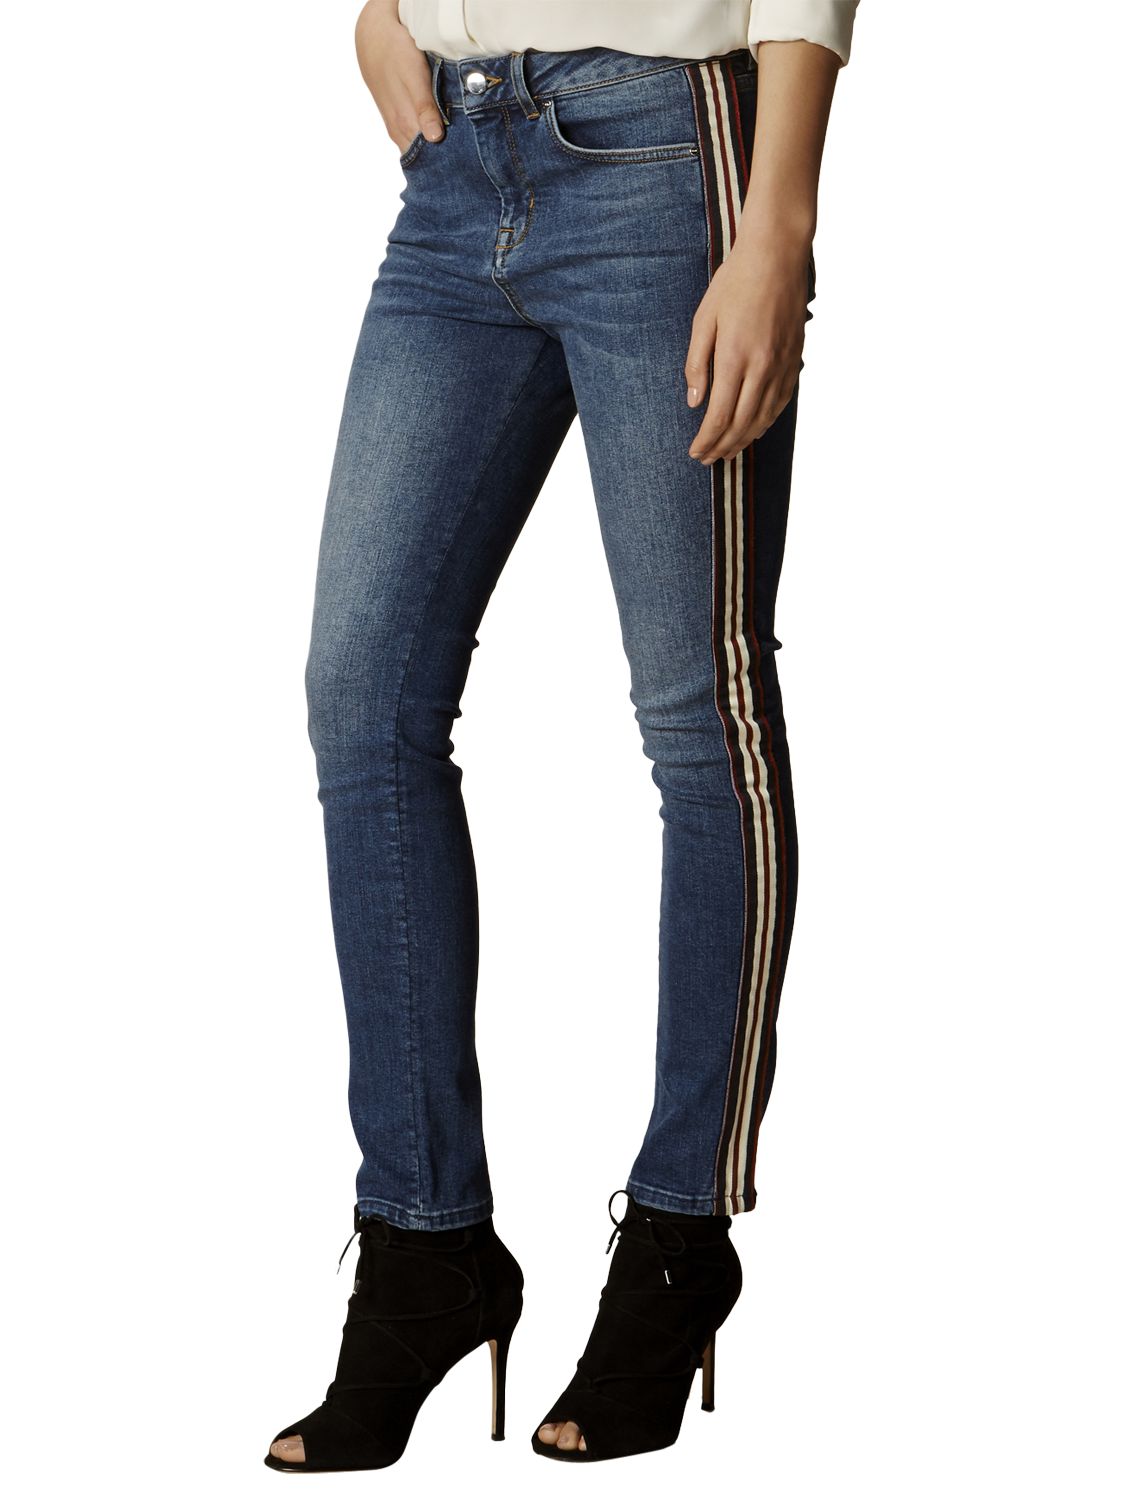 jeans with stripe down side womens